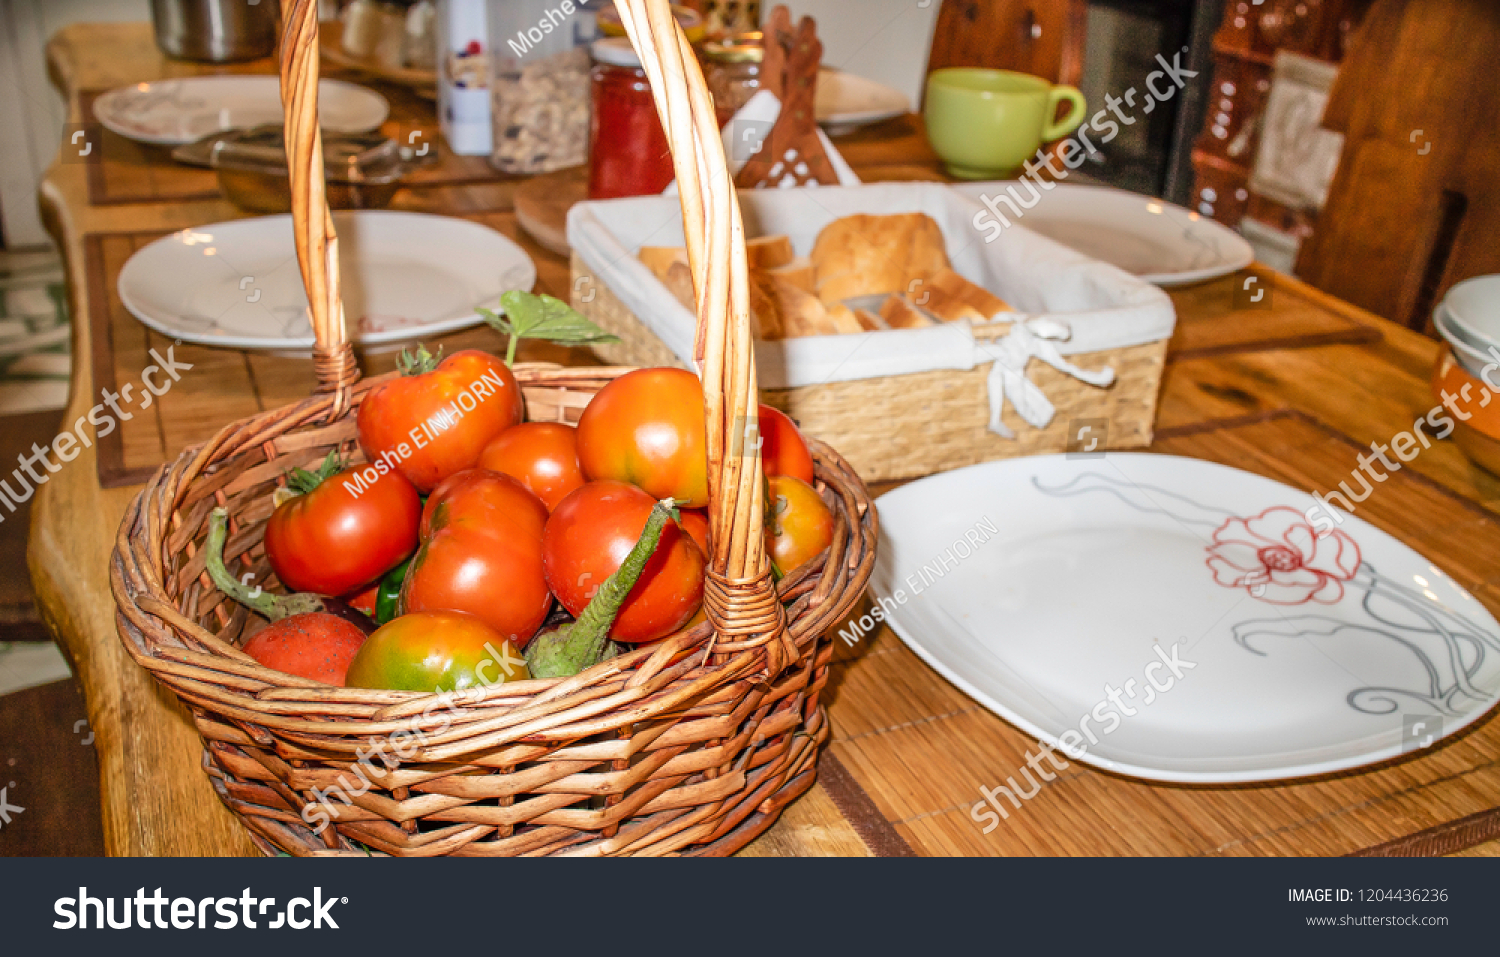 A basket of freshly picked organic tomatoes served for breakfast. #1204436236